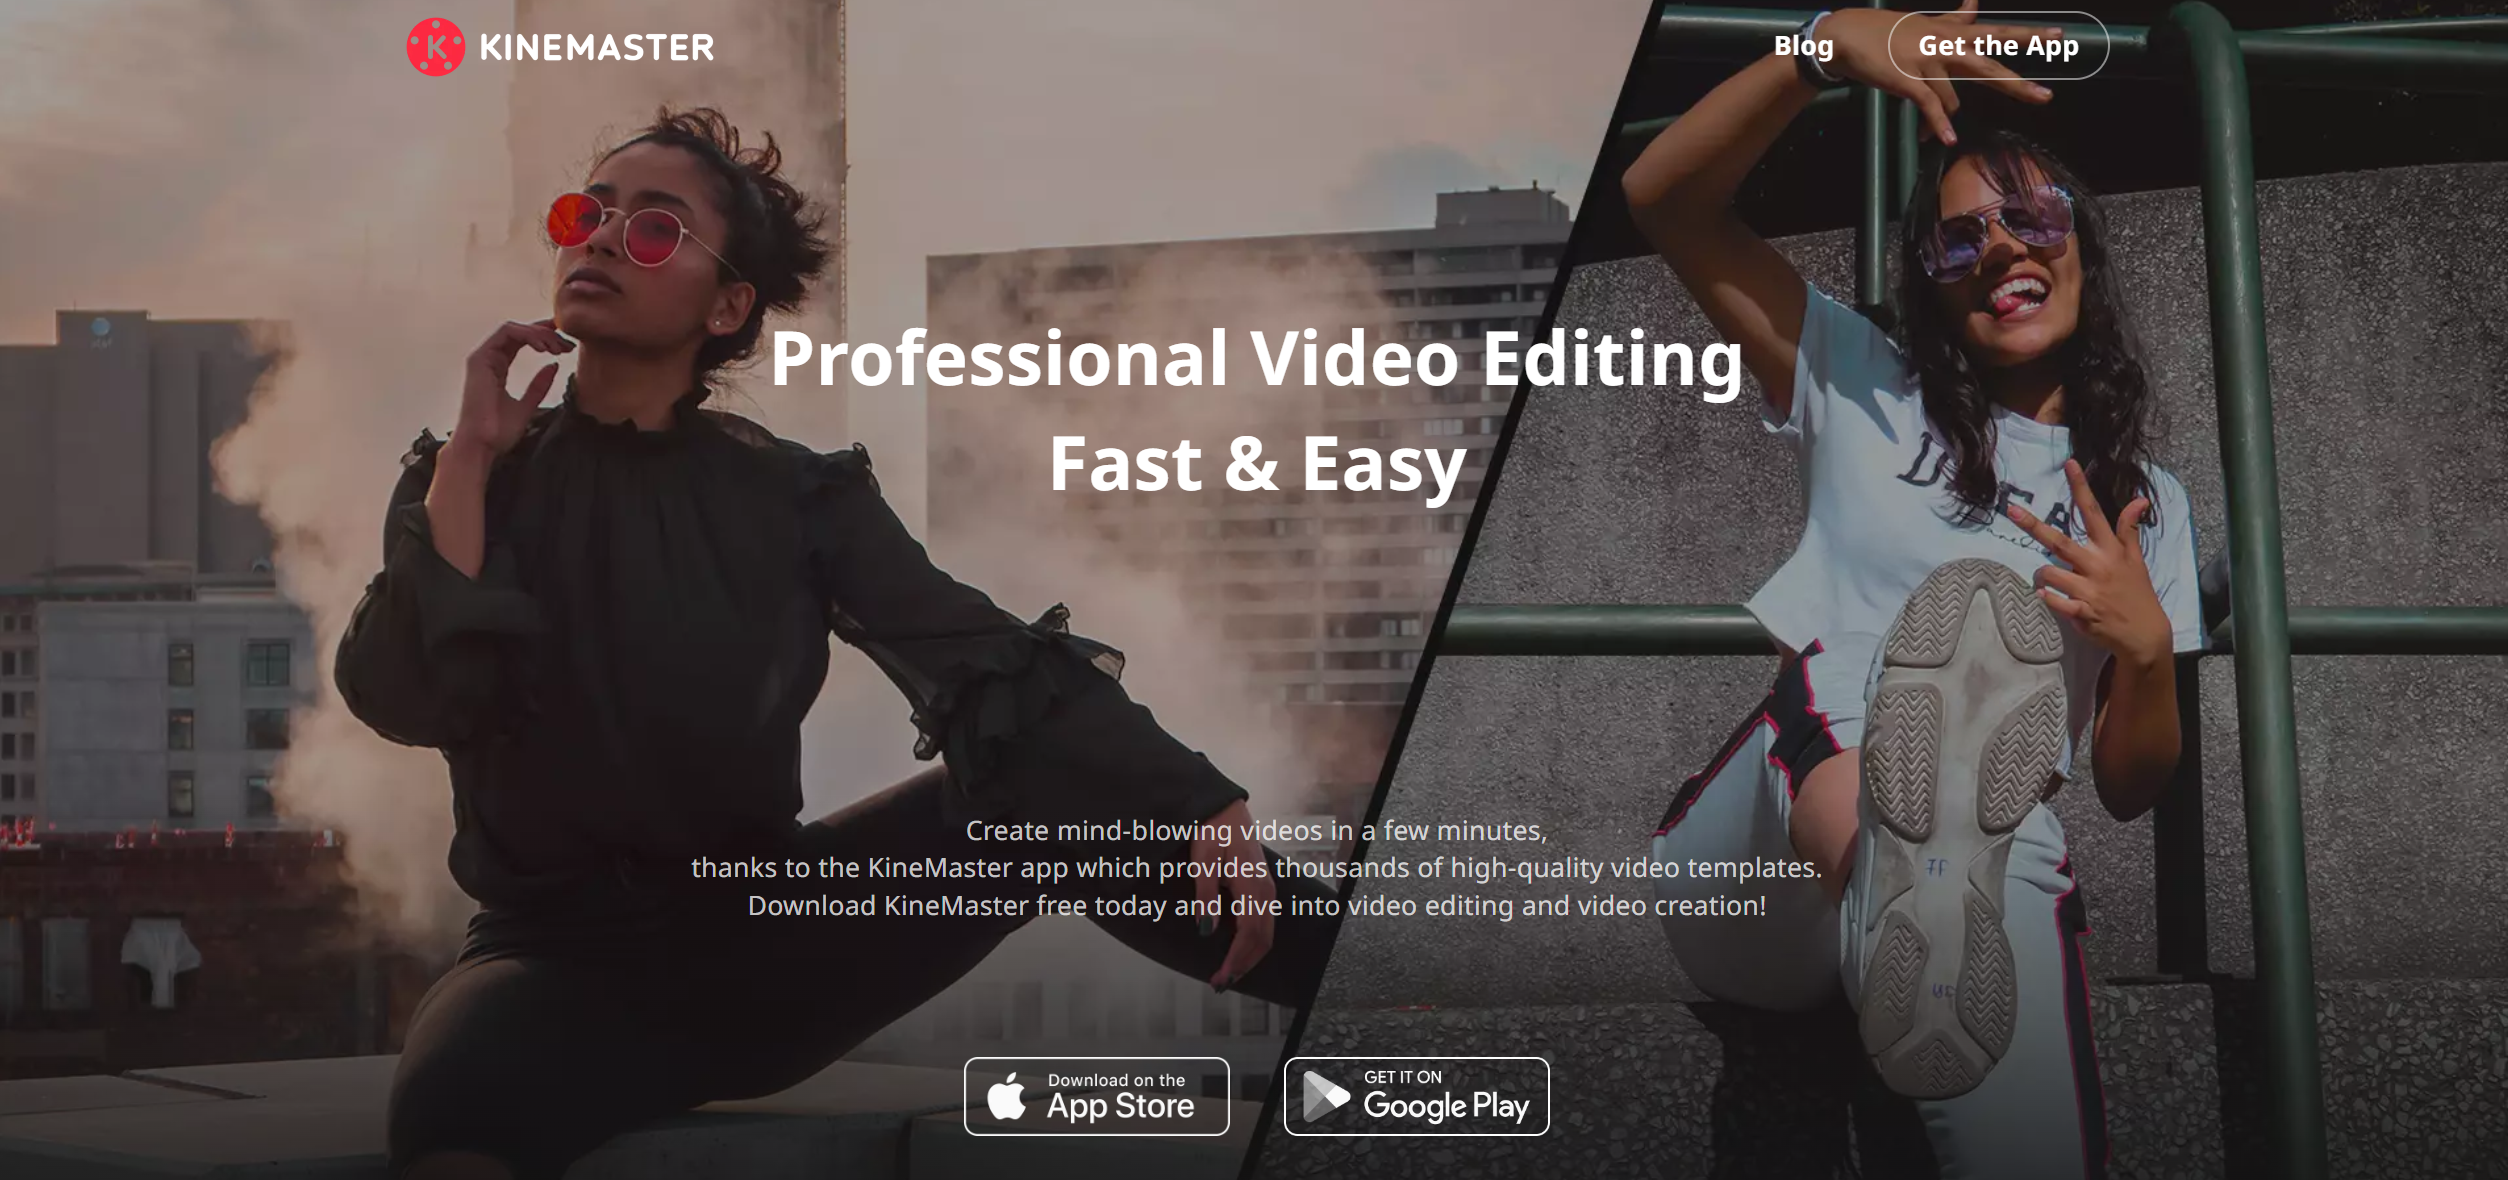 KineMaster: The top video editing apps for Android